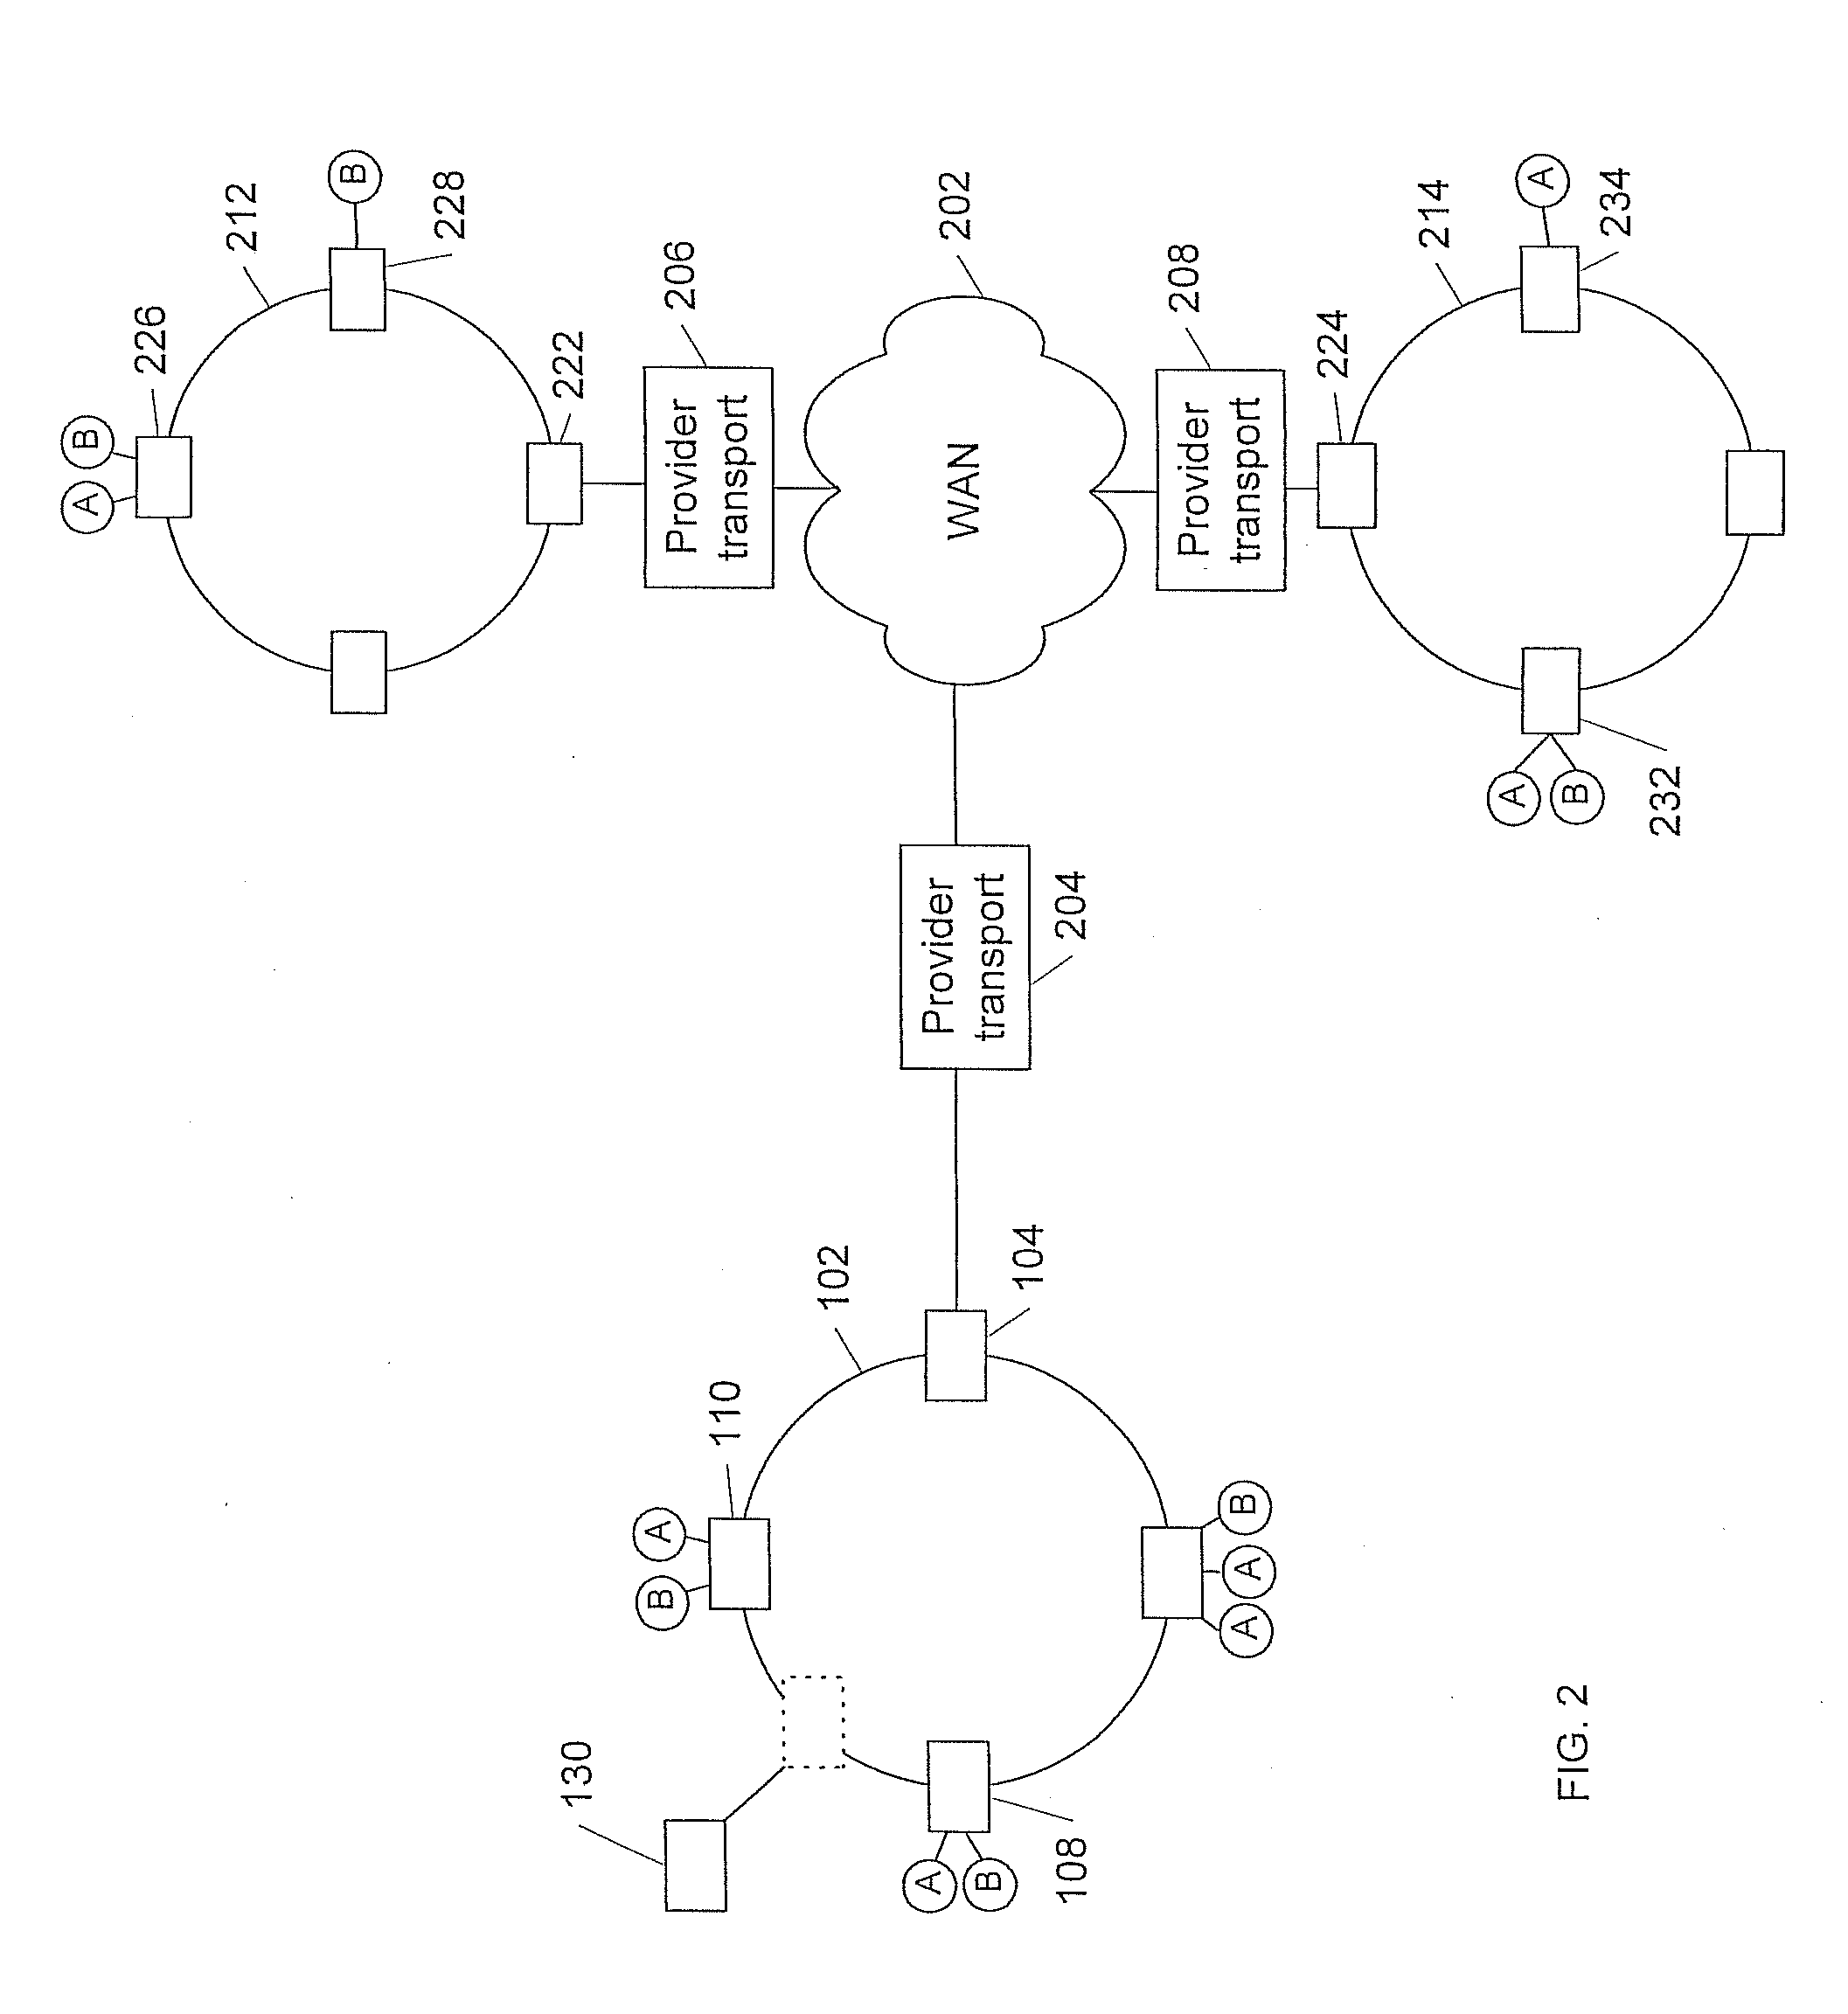 System and method for providing transparent LAN services